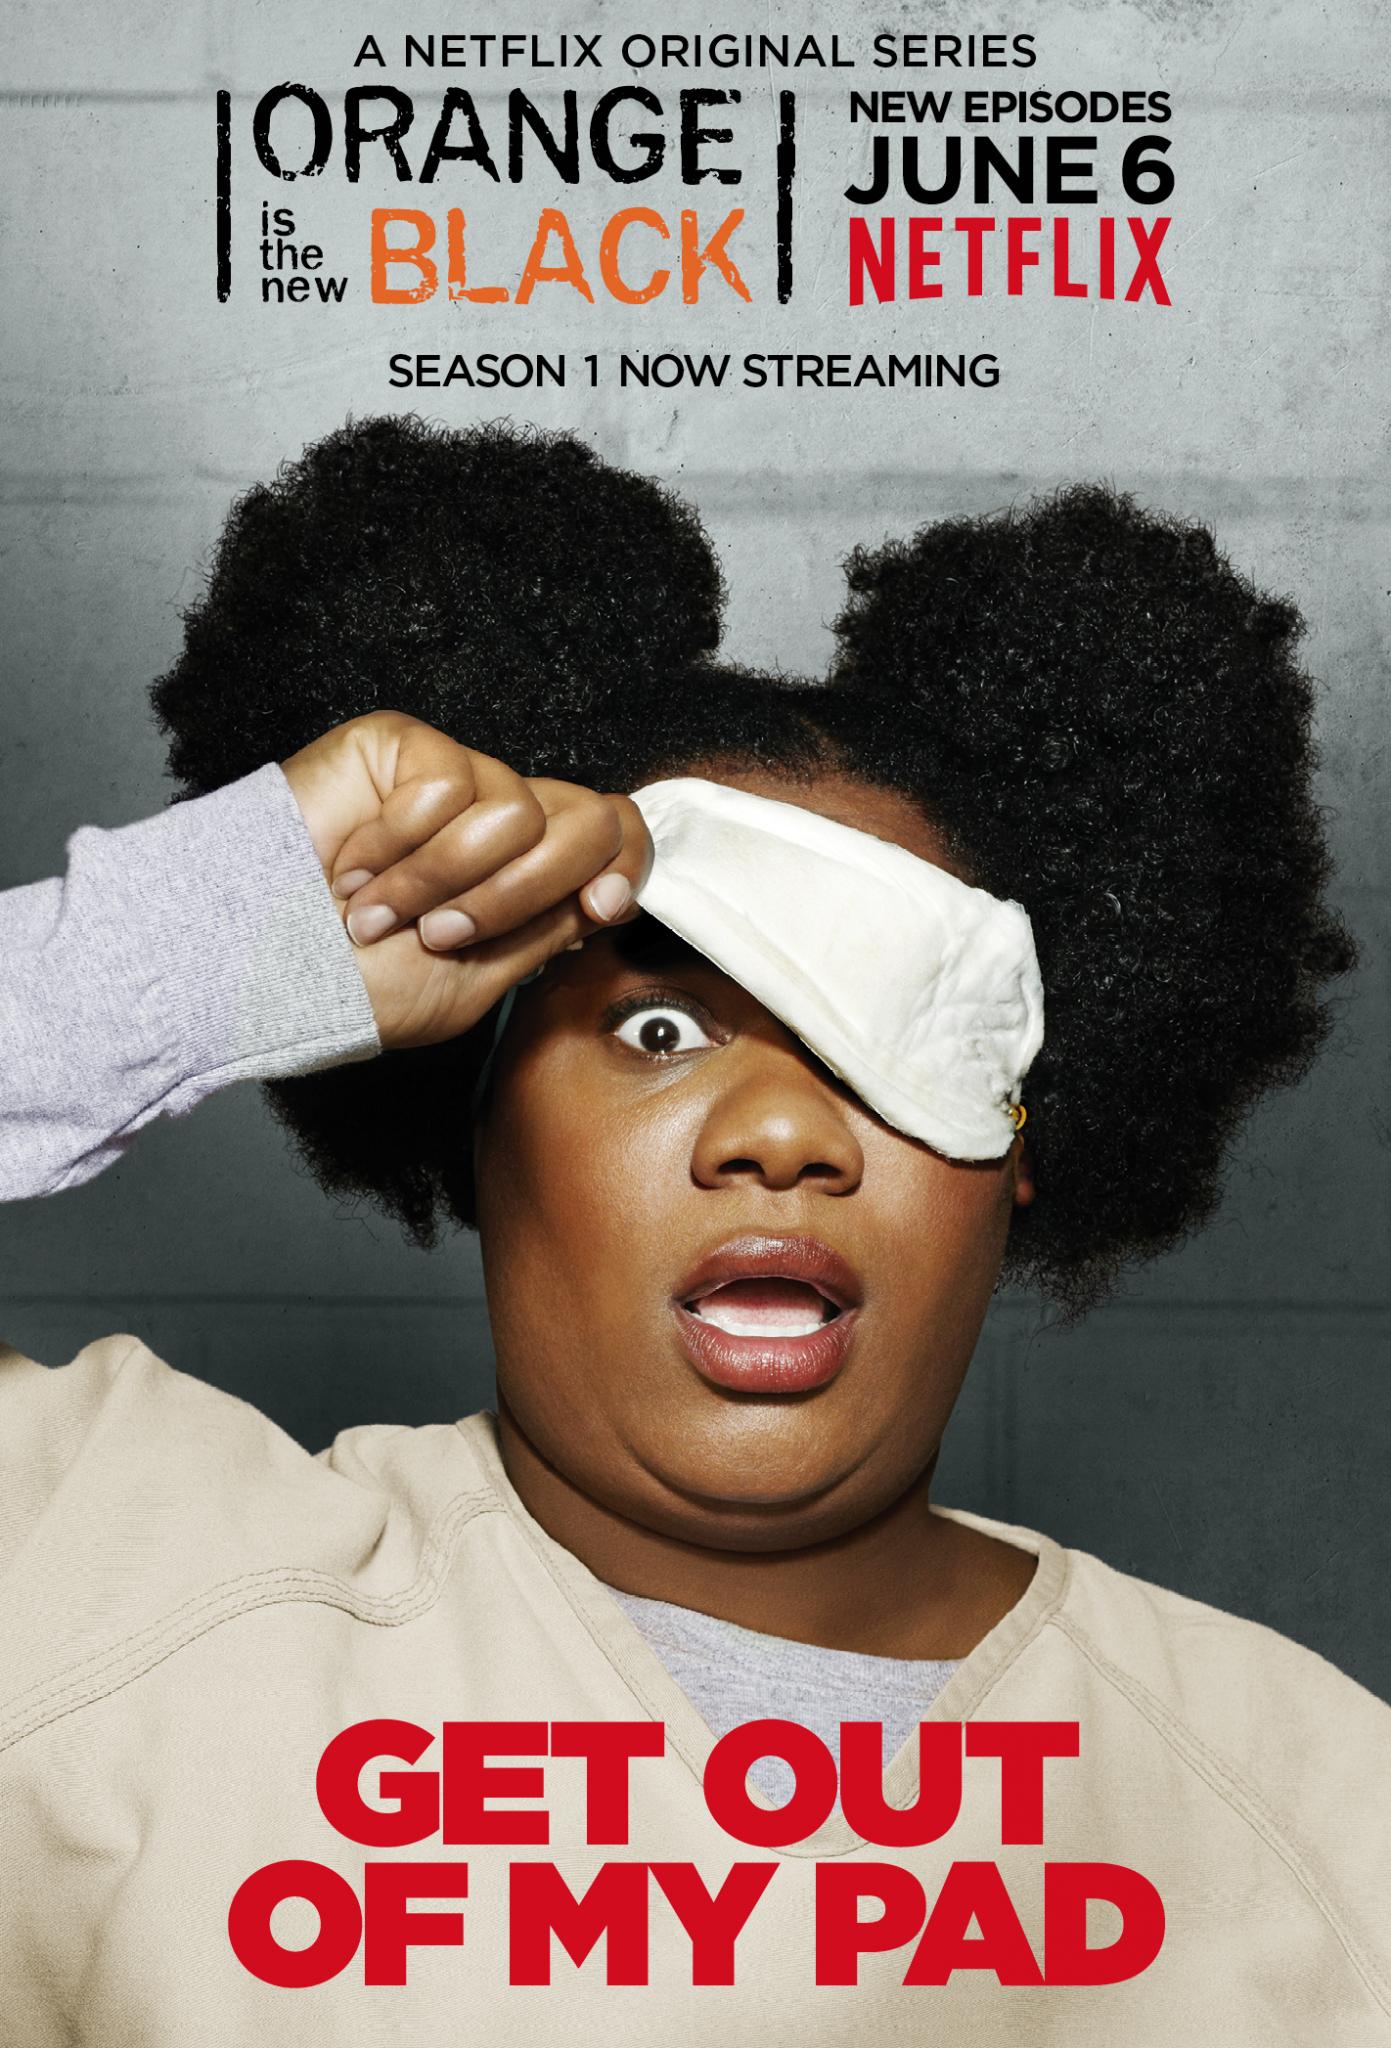 First Look: See New Posters for Season 2 of ‘Orange is the New Black’